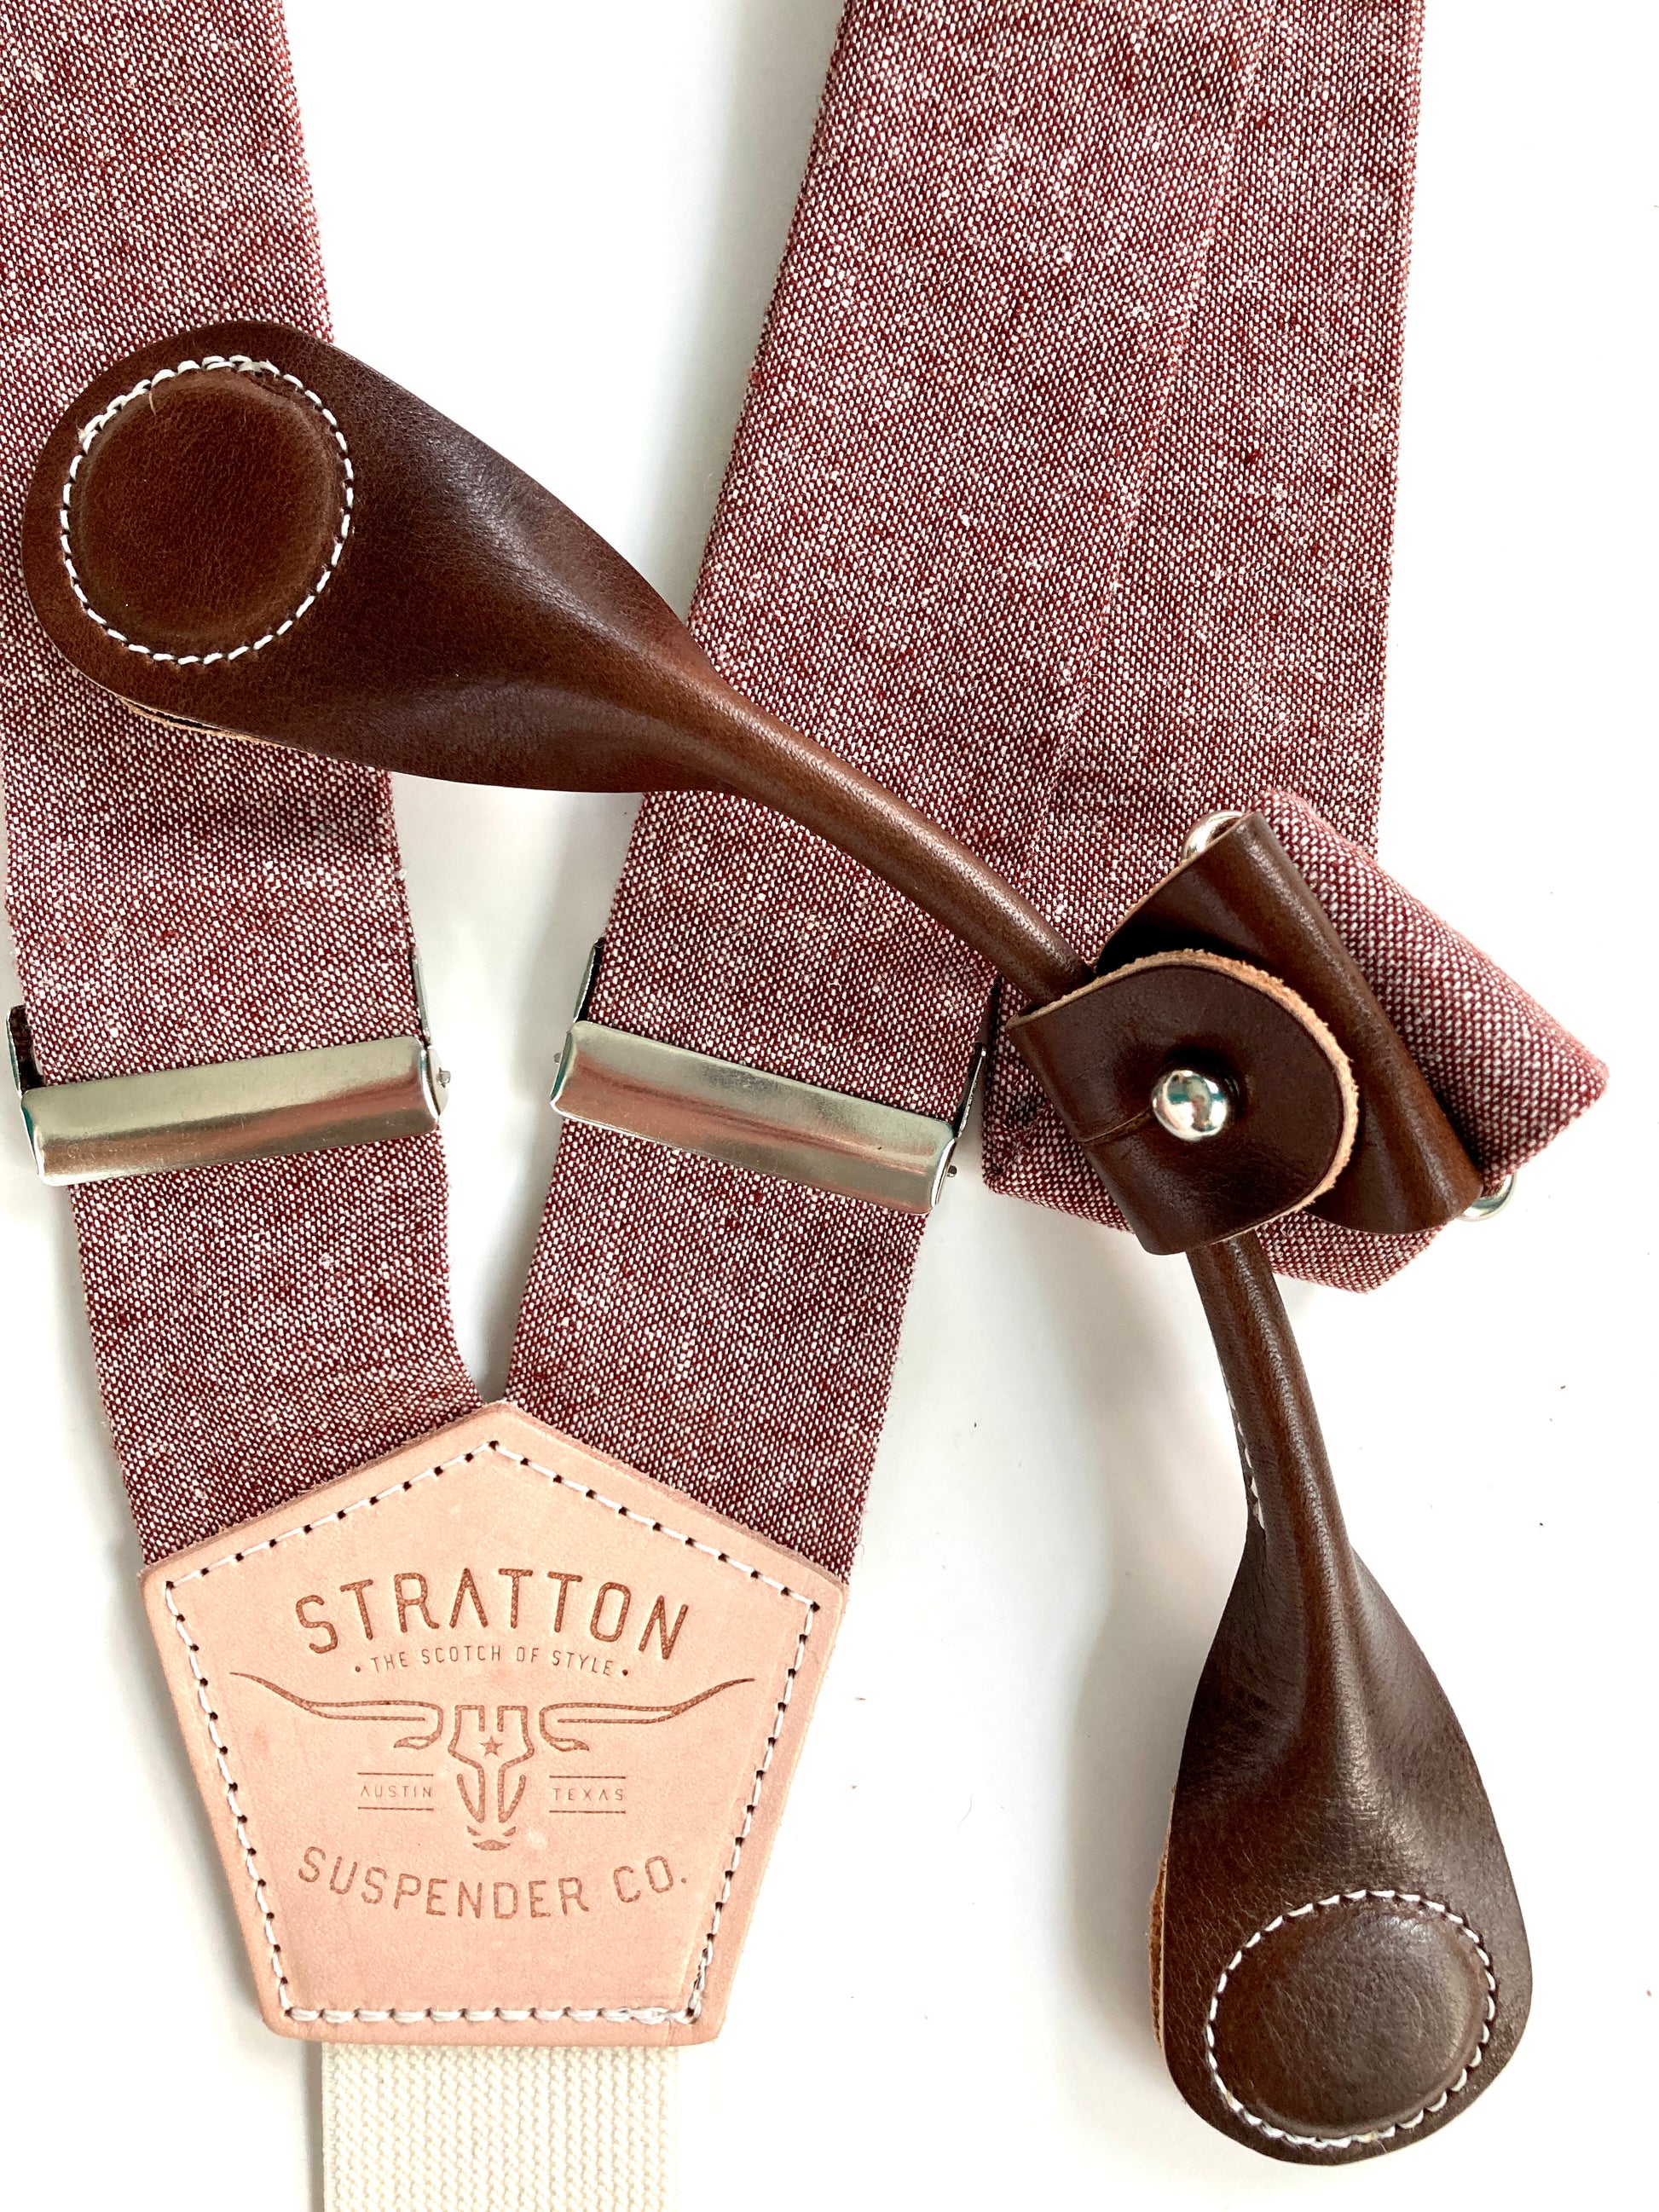 Stratton Suspender Co. features the Rust (Maroon) linen suspenders on veg tan shoulder leather with cream colored elastic back strap for the Fall 2022 suspenders collection Magnetic Stratton Suspender clasps in Chocolate Pontedero Italian leather hand-picked by Stratton Suspender Co.